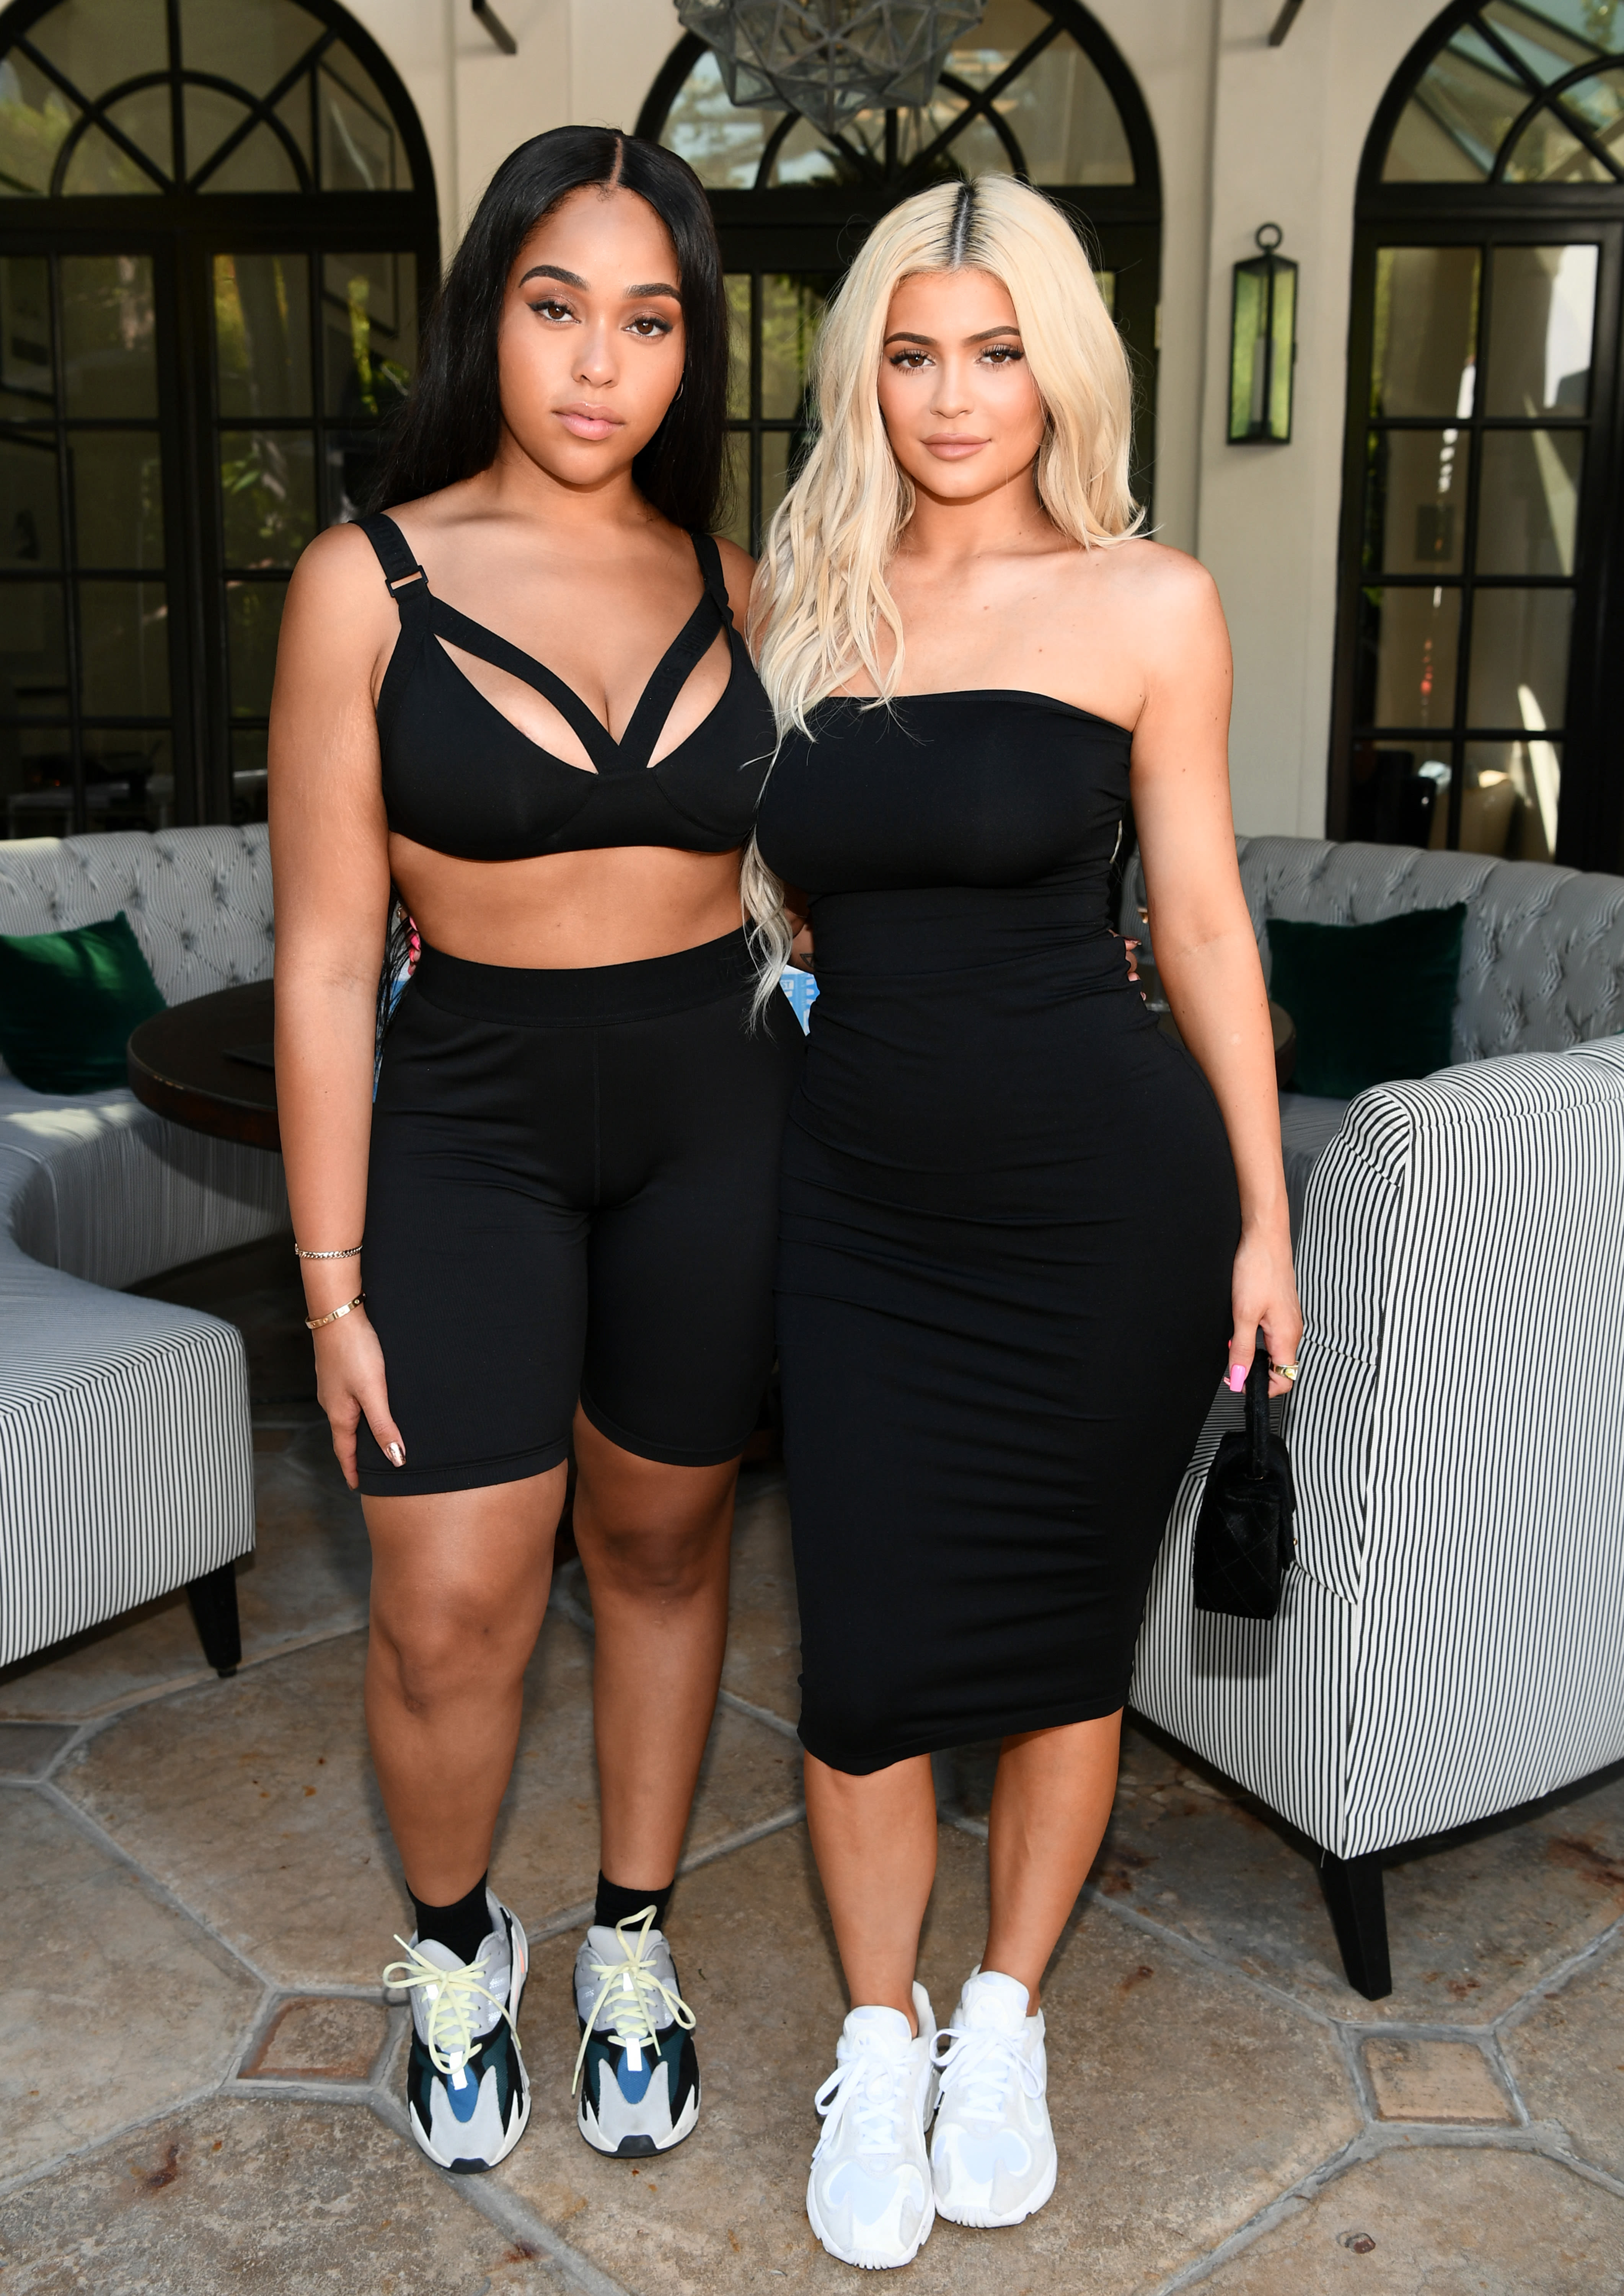 Kylie Jenner Says She and Jordyn Woods Have ‘Healthy Distance’ in Friendship After Tristan Scandal